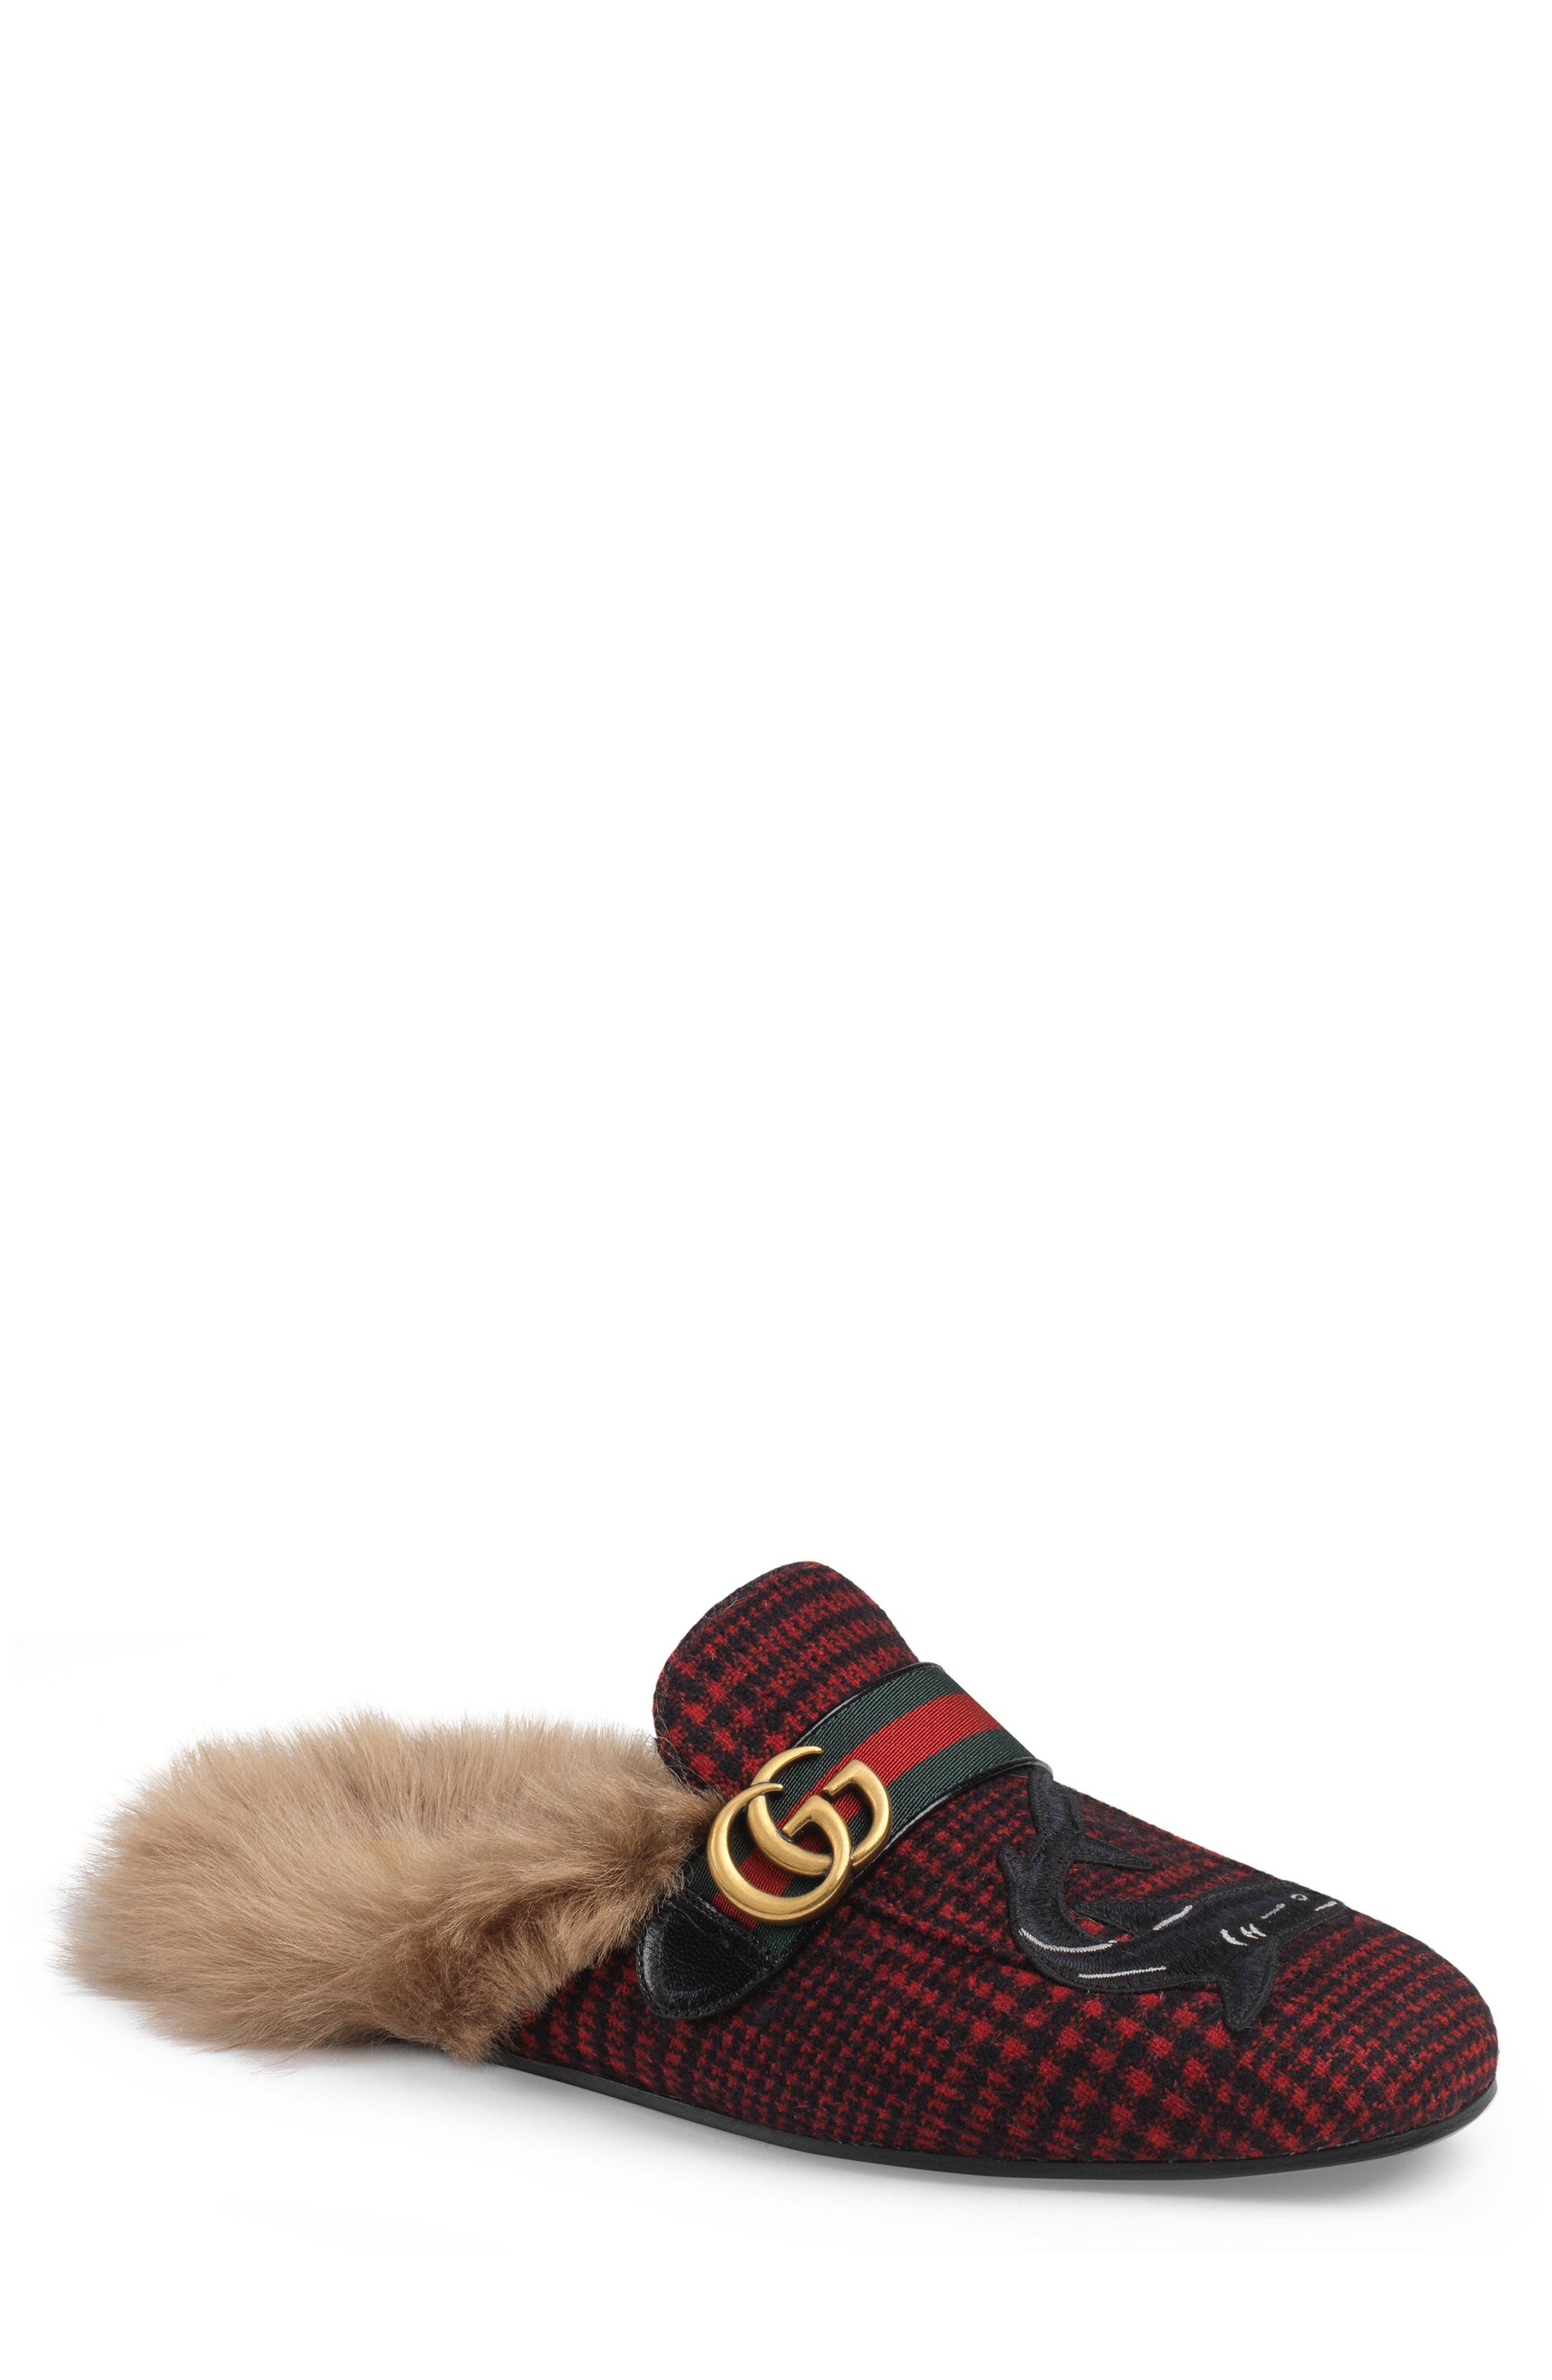 nordstrom gucci princetown